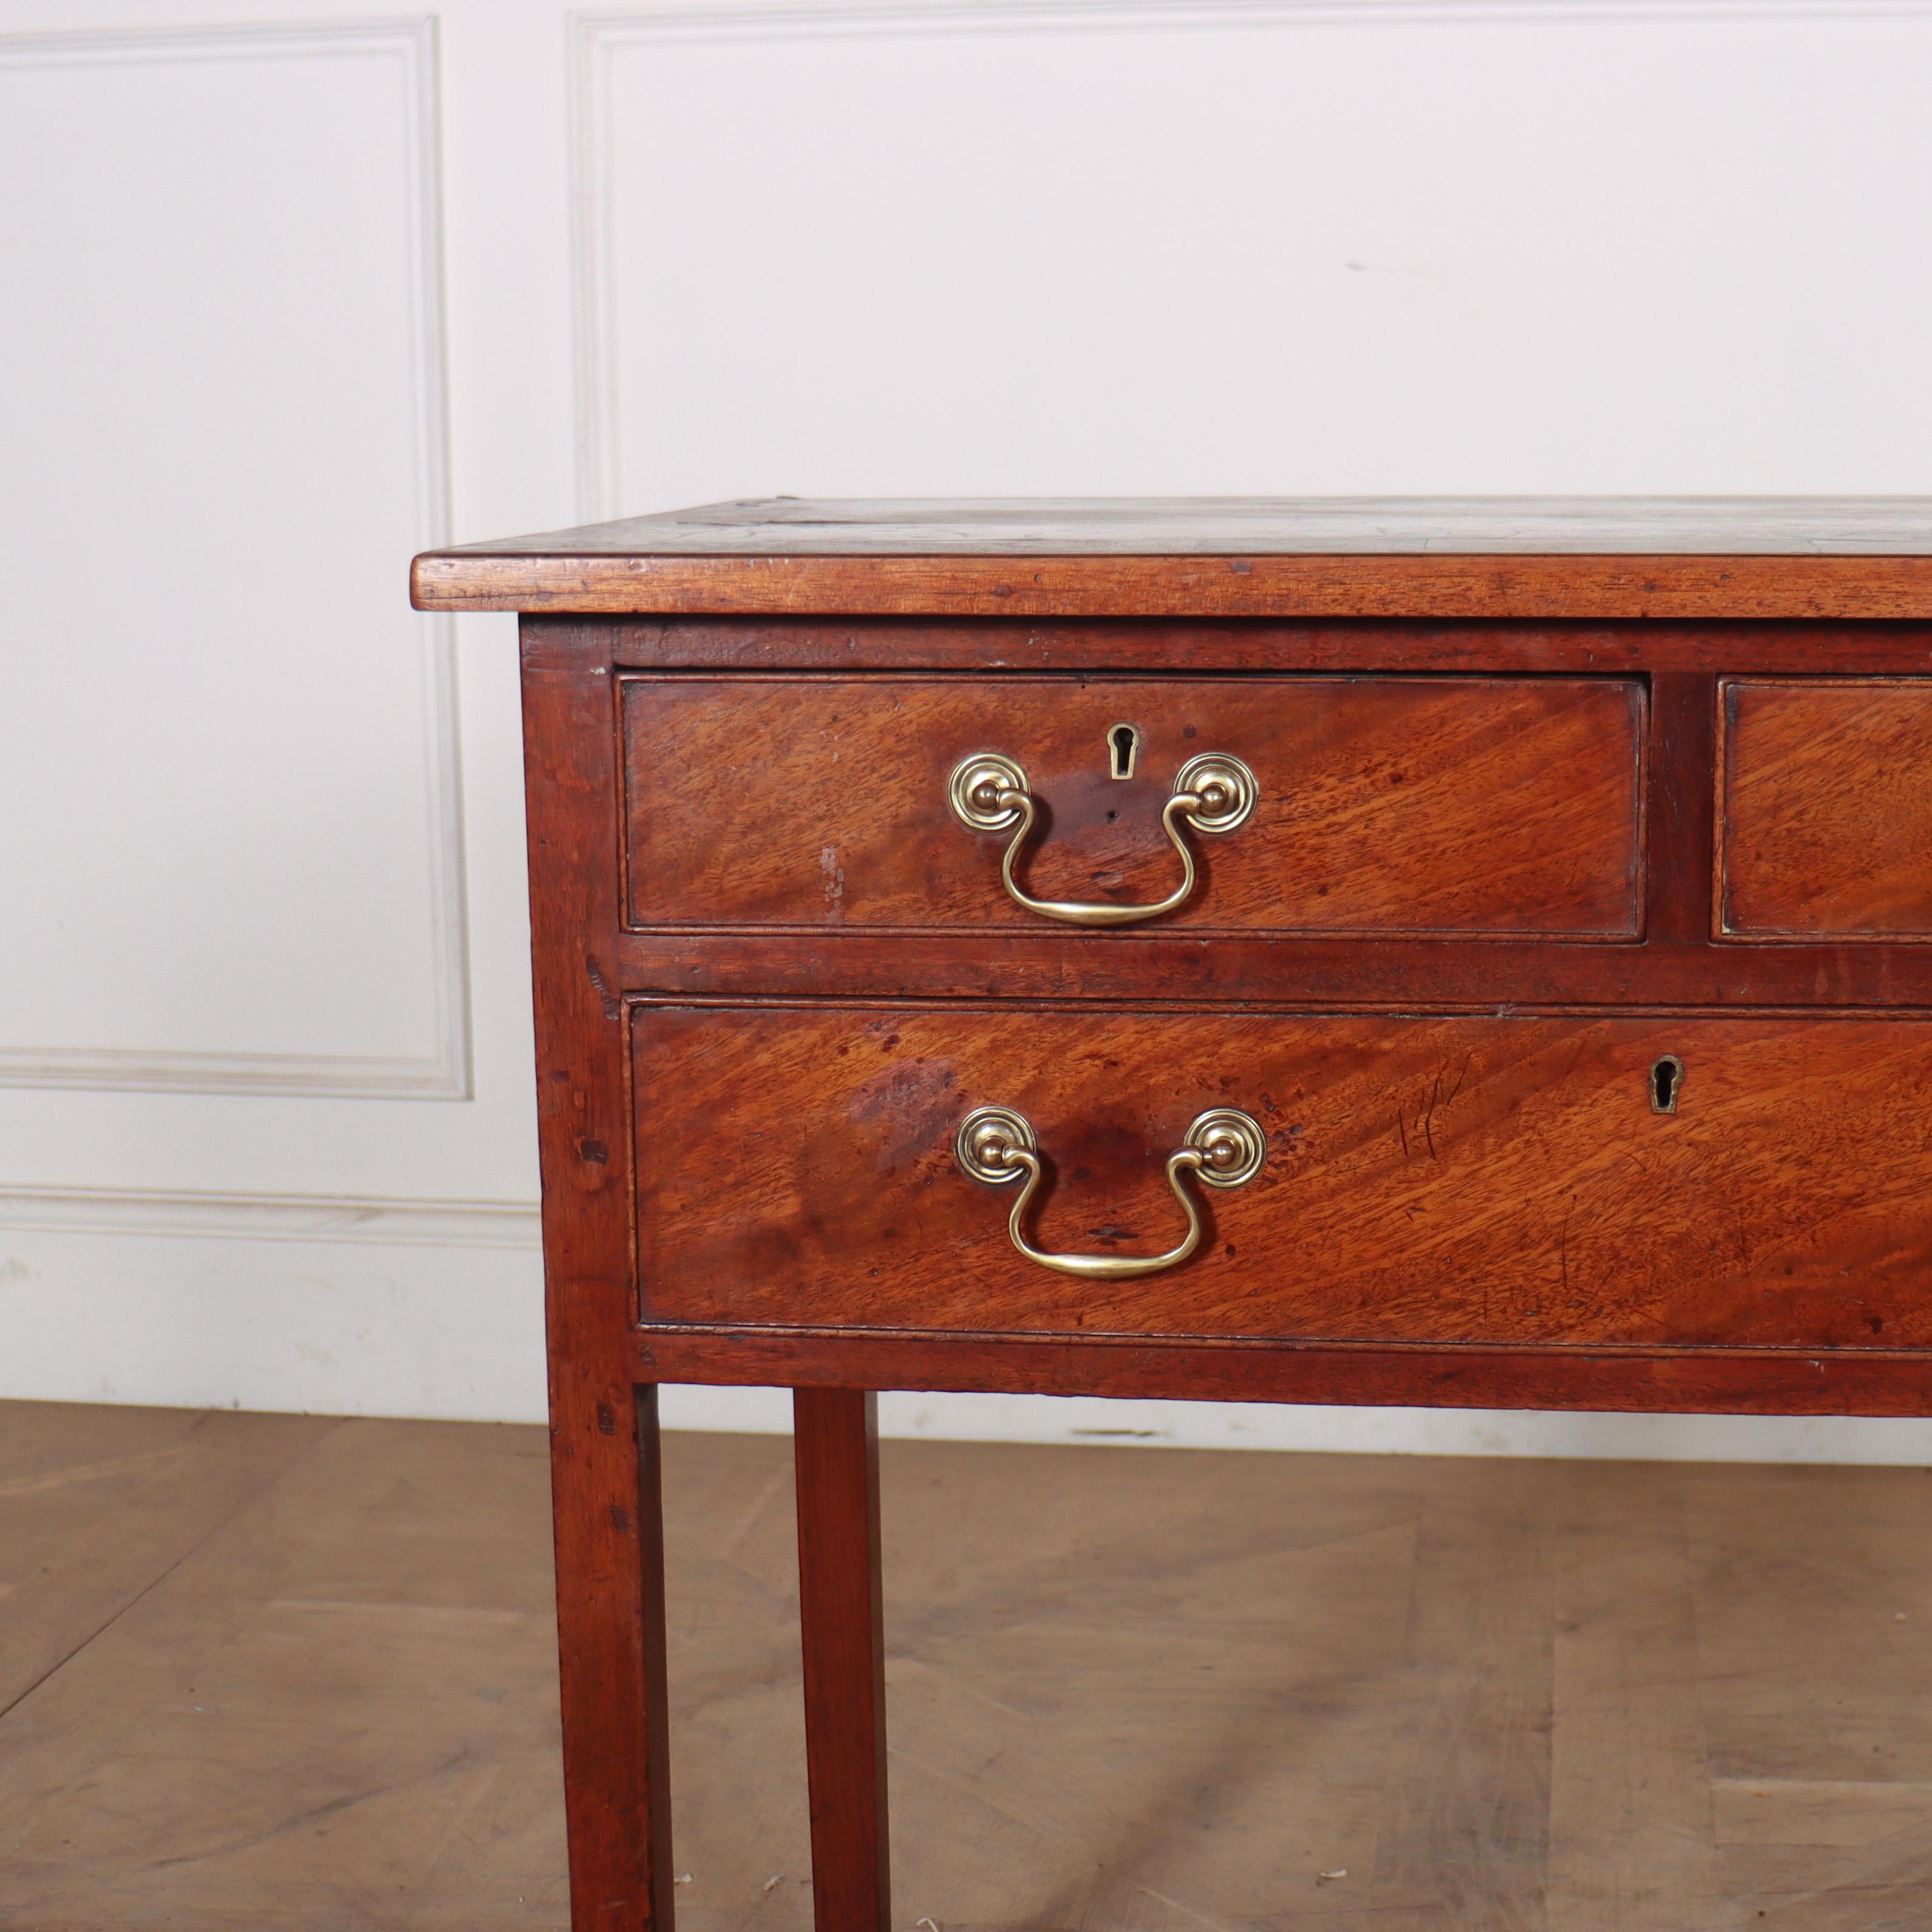 Pretty 19th C English 3 drawer mahogany low boy / lamp table. 1830.

Reference: 8246

Dimensions
30.5 inches (77 cms) Wide
18 inches (46 cms) Deep
29 inches (74 cms) High